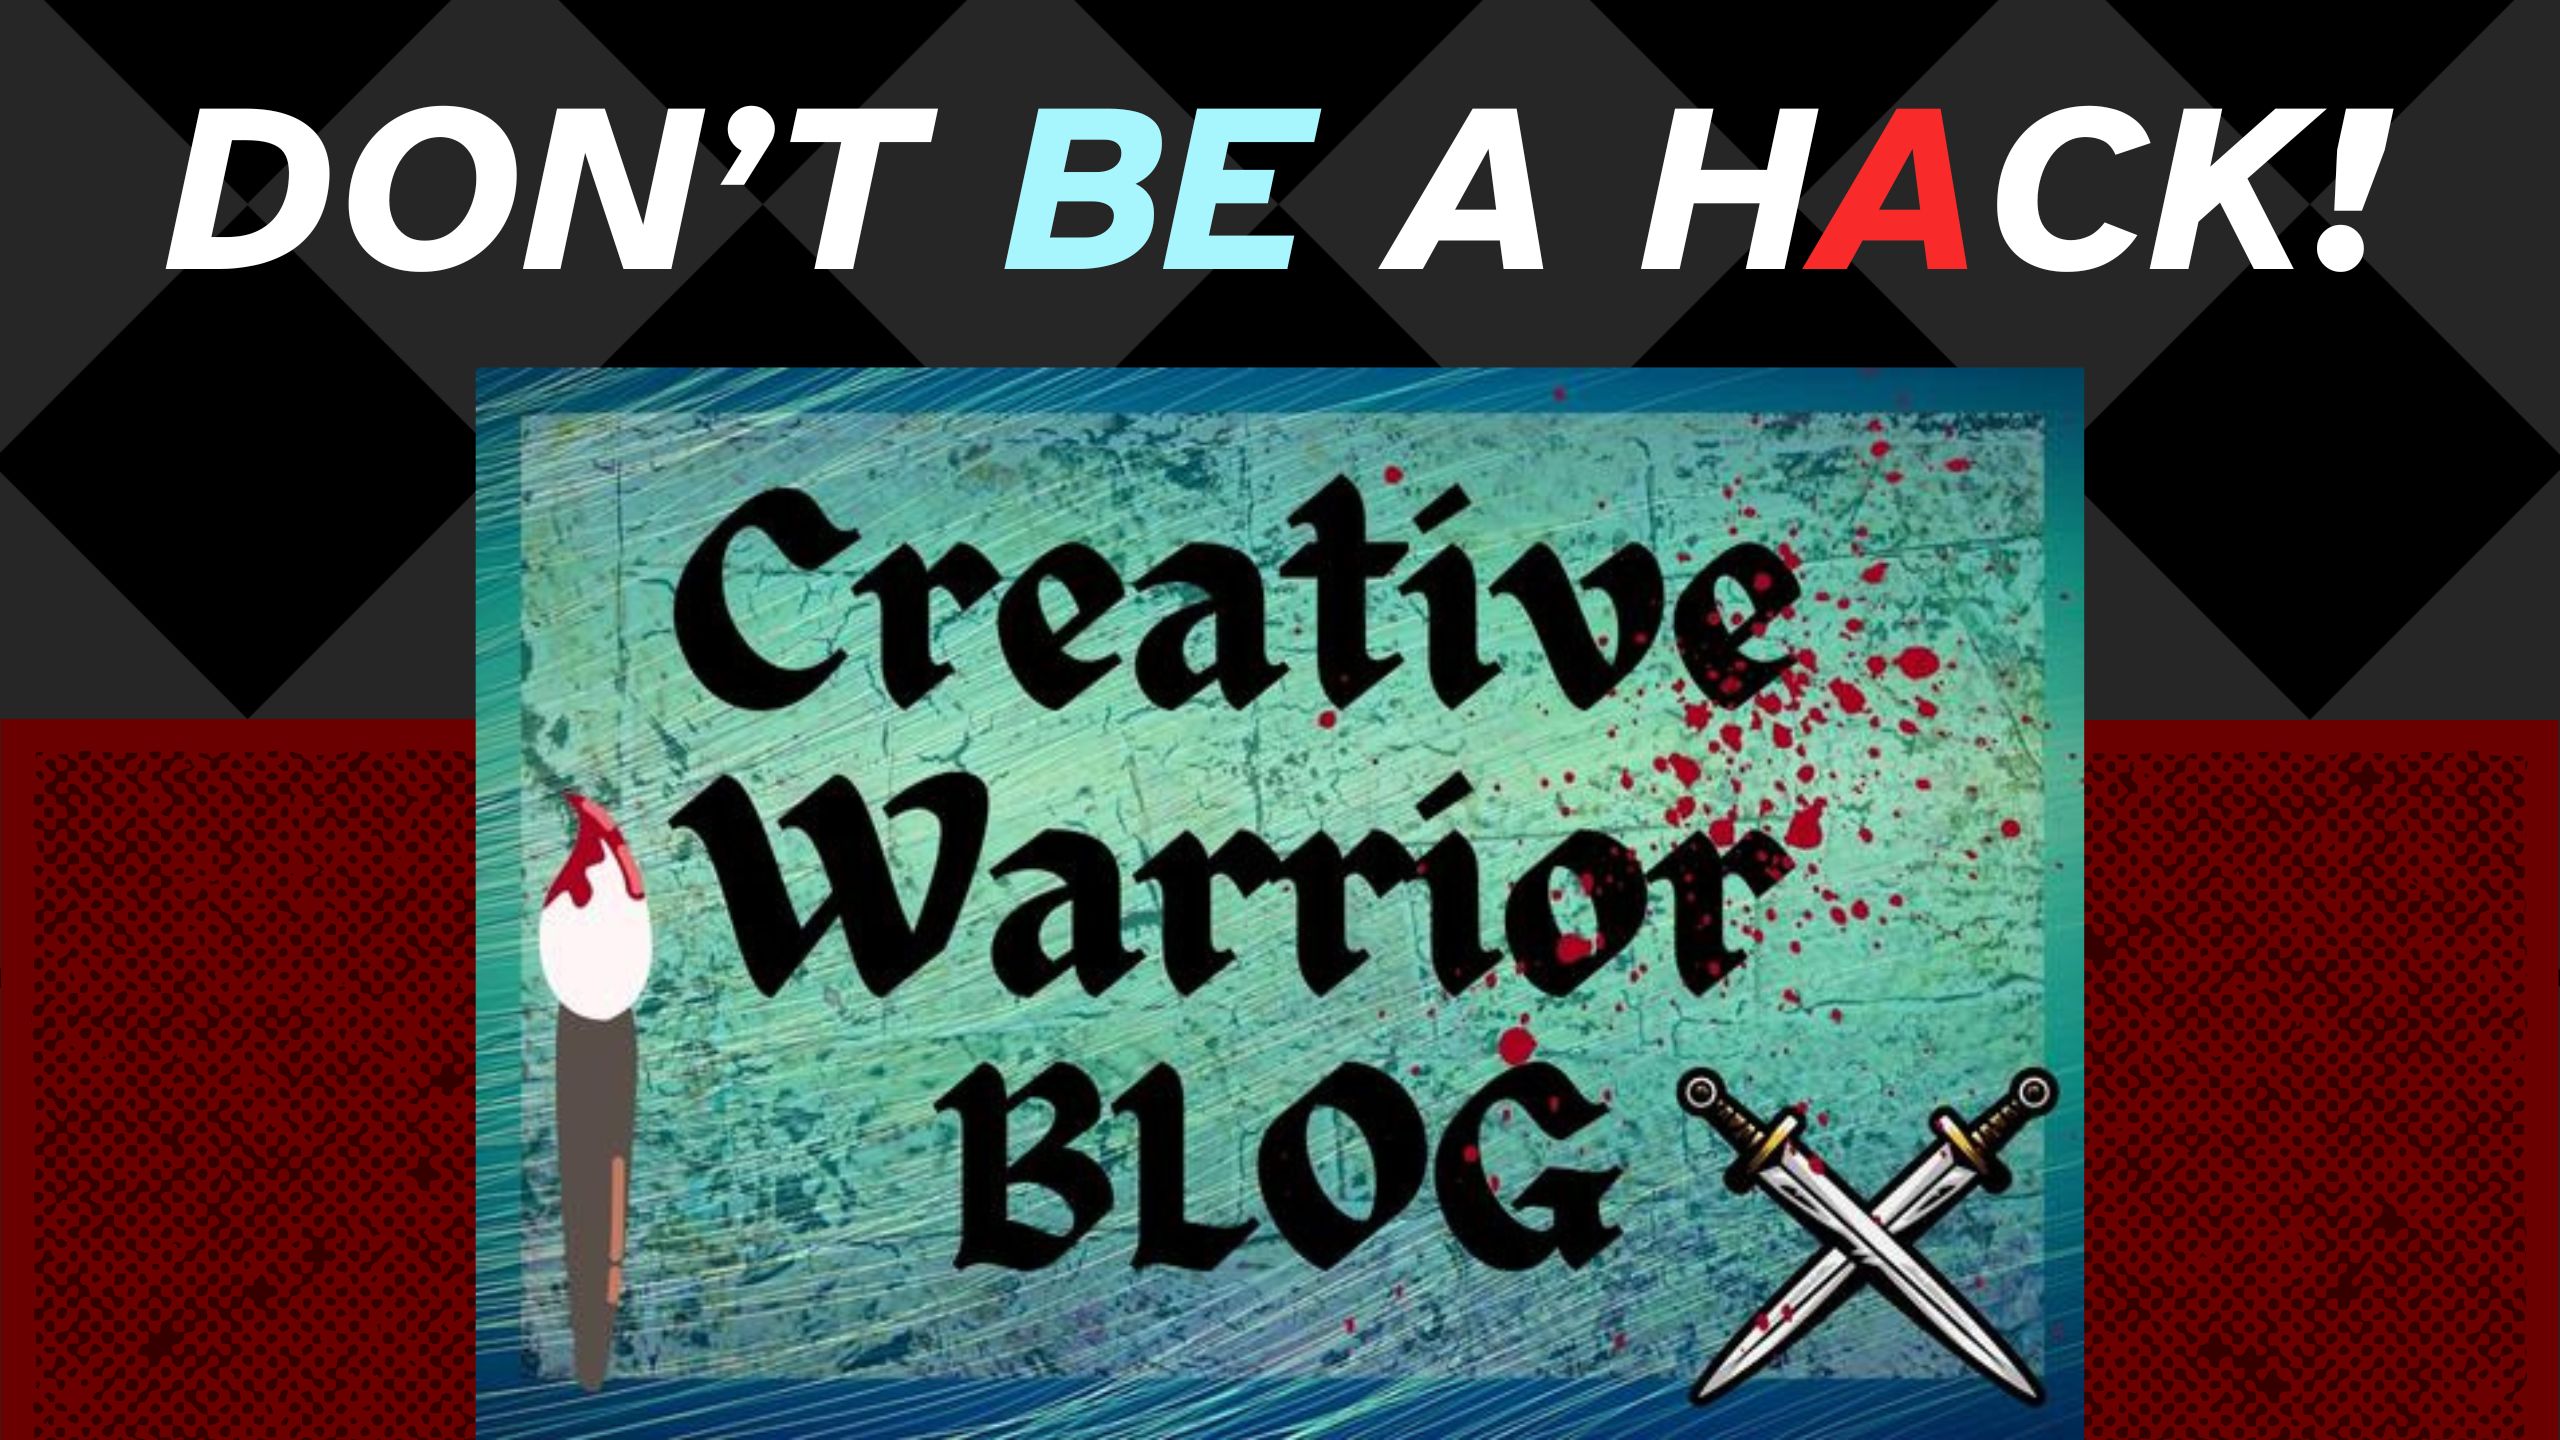 Don't be a hack, creative warrior, real writer, authentic writer, creativity